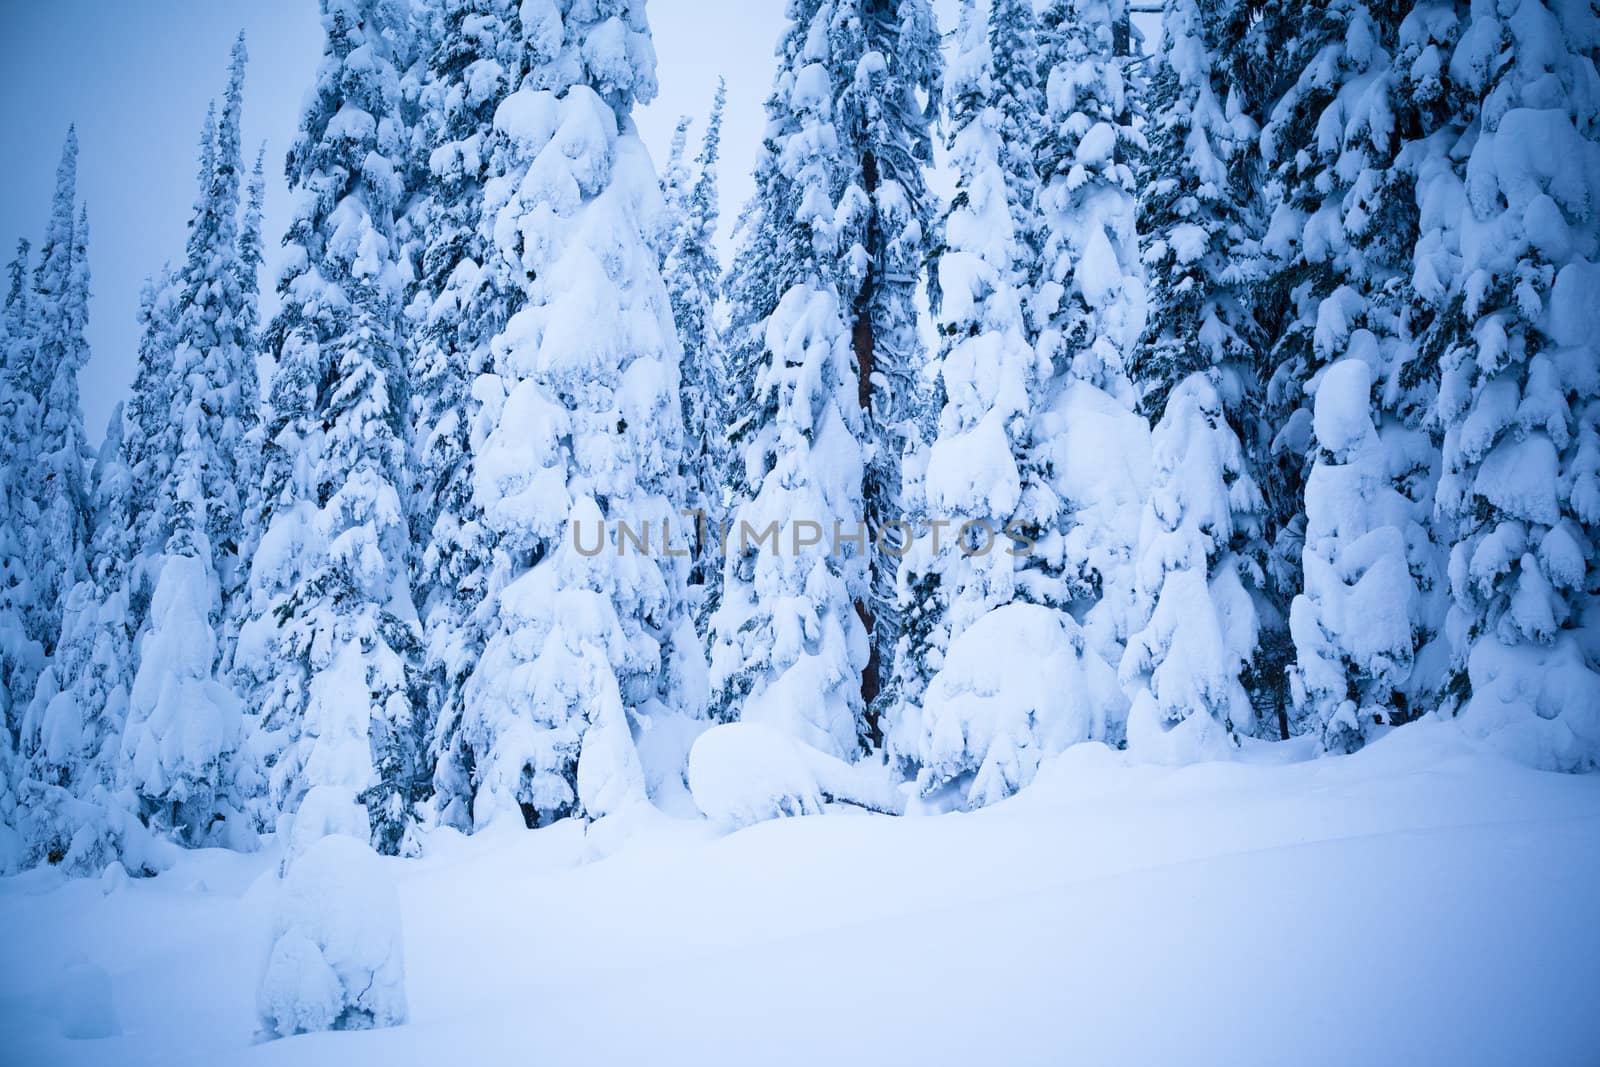 A cold scene in winter of snow covered spruce trees